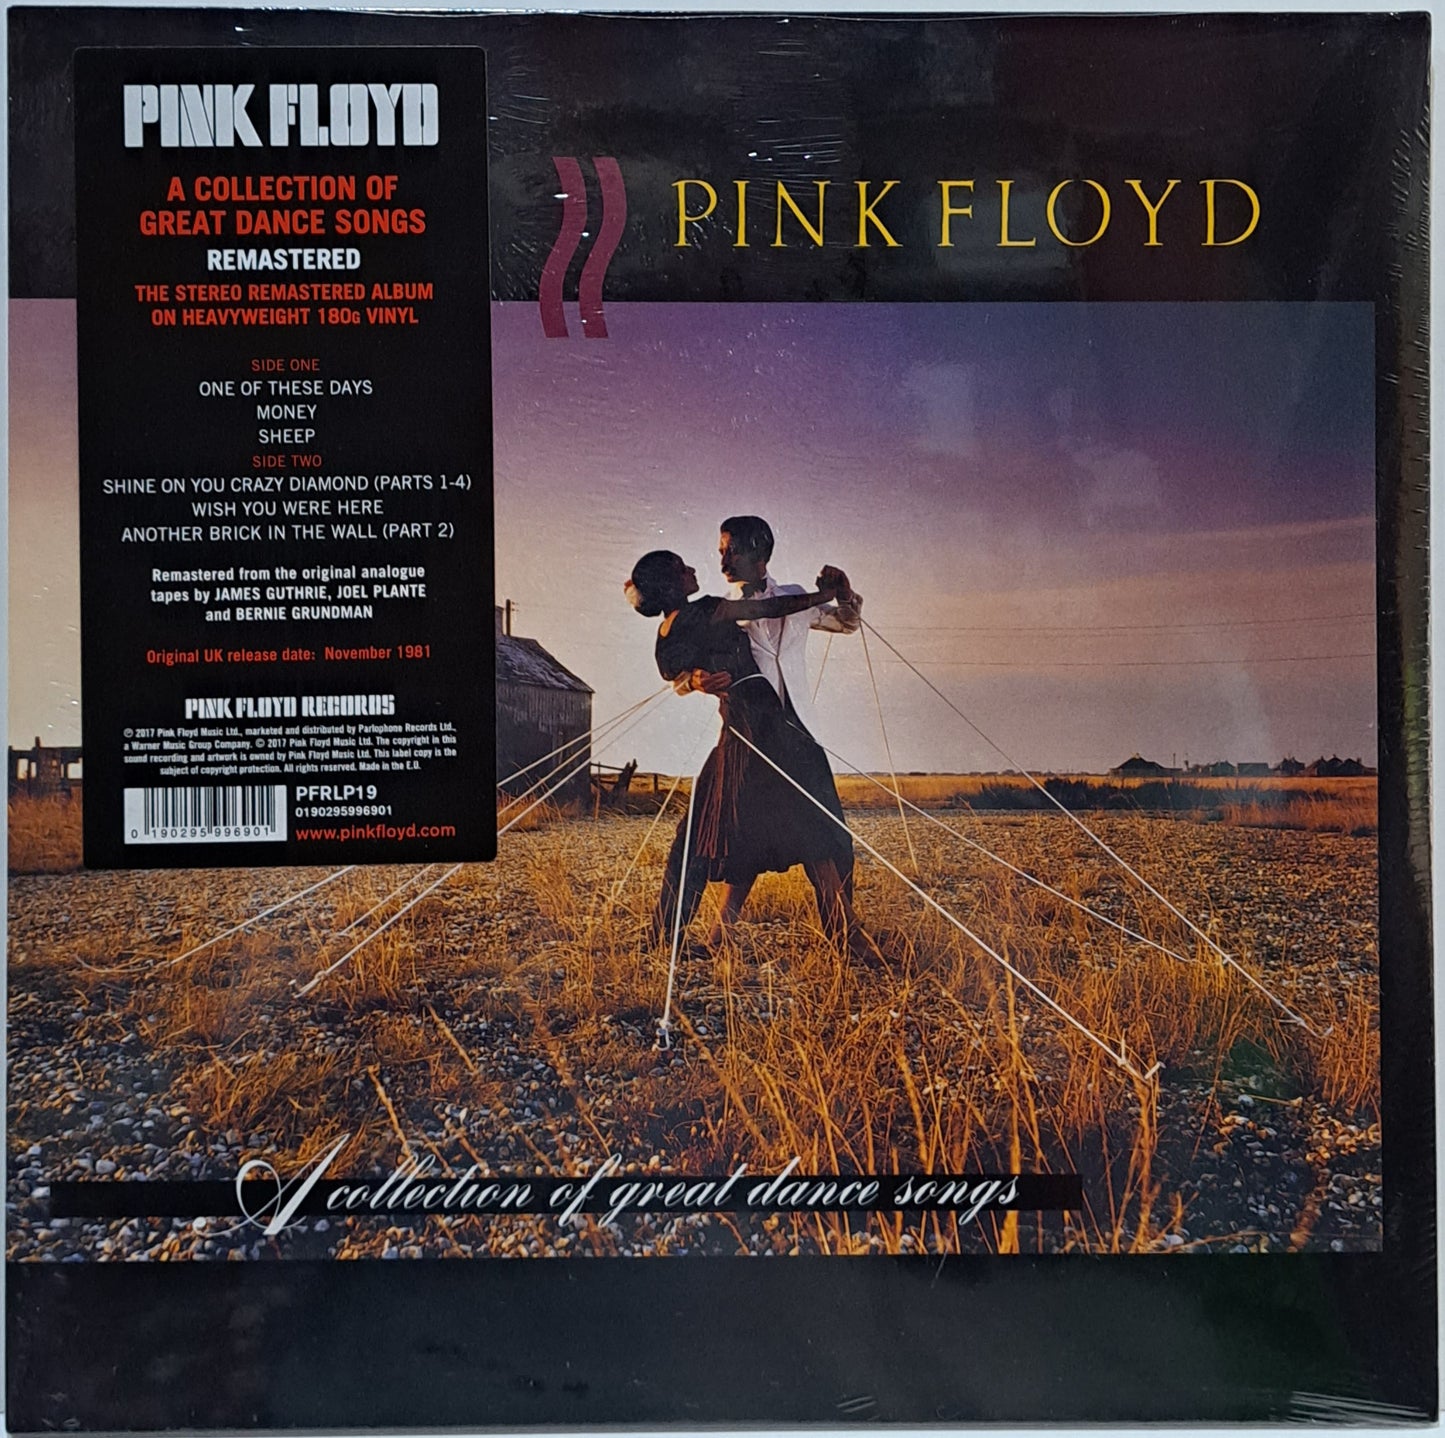 PINK FLOYD - A COLLECTION OF GREAT DANCE SONGS  LP